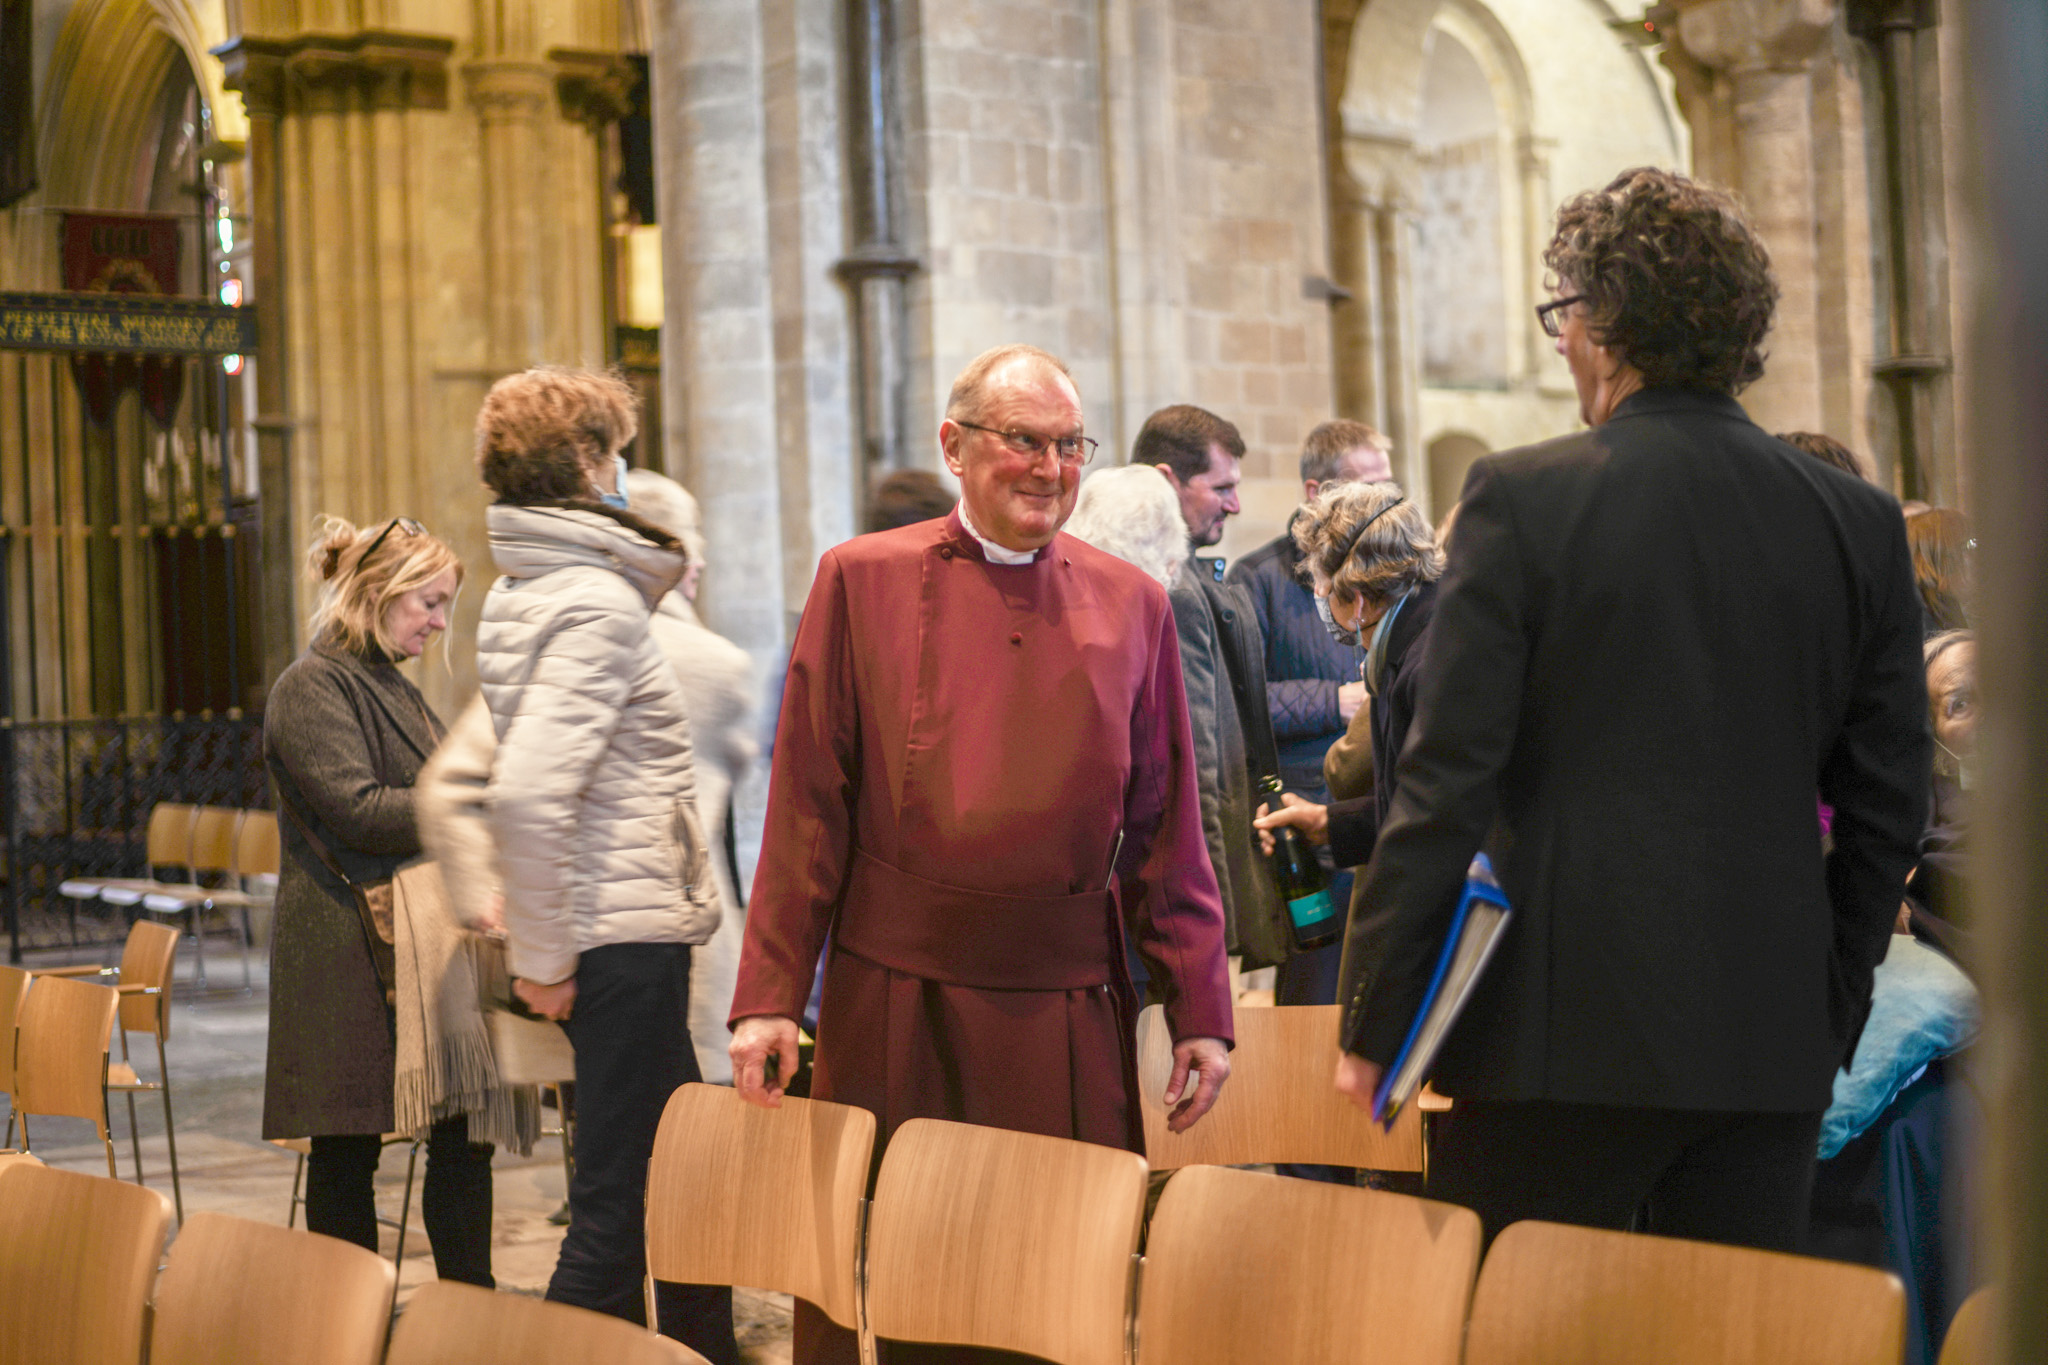 Head Verger Howard Waddell greeting members of the congregation